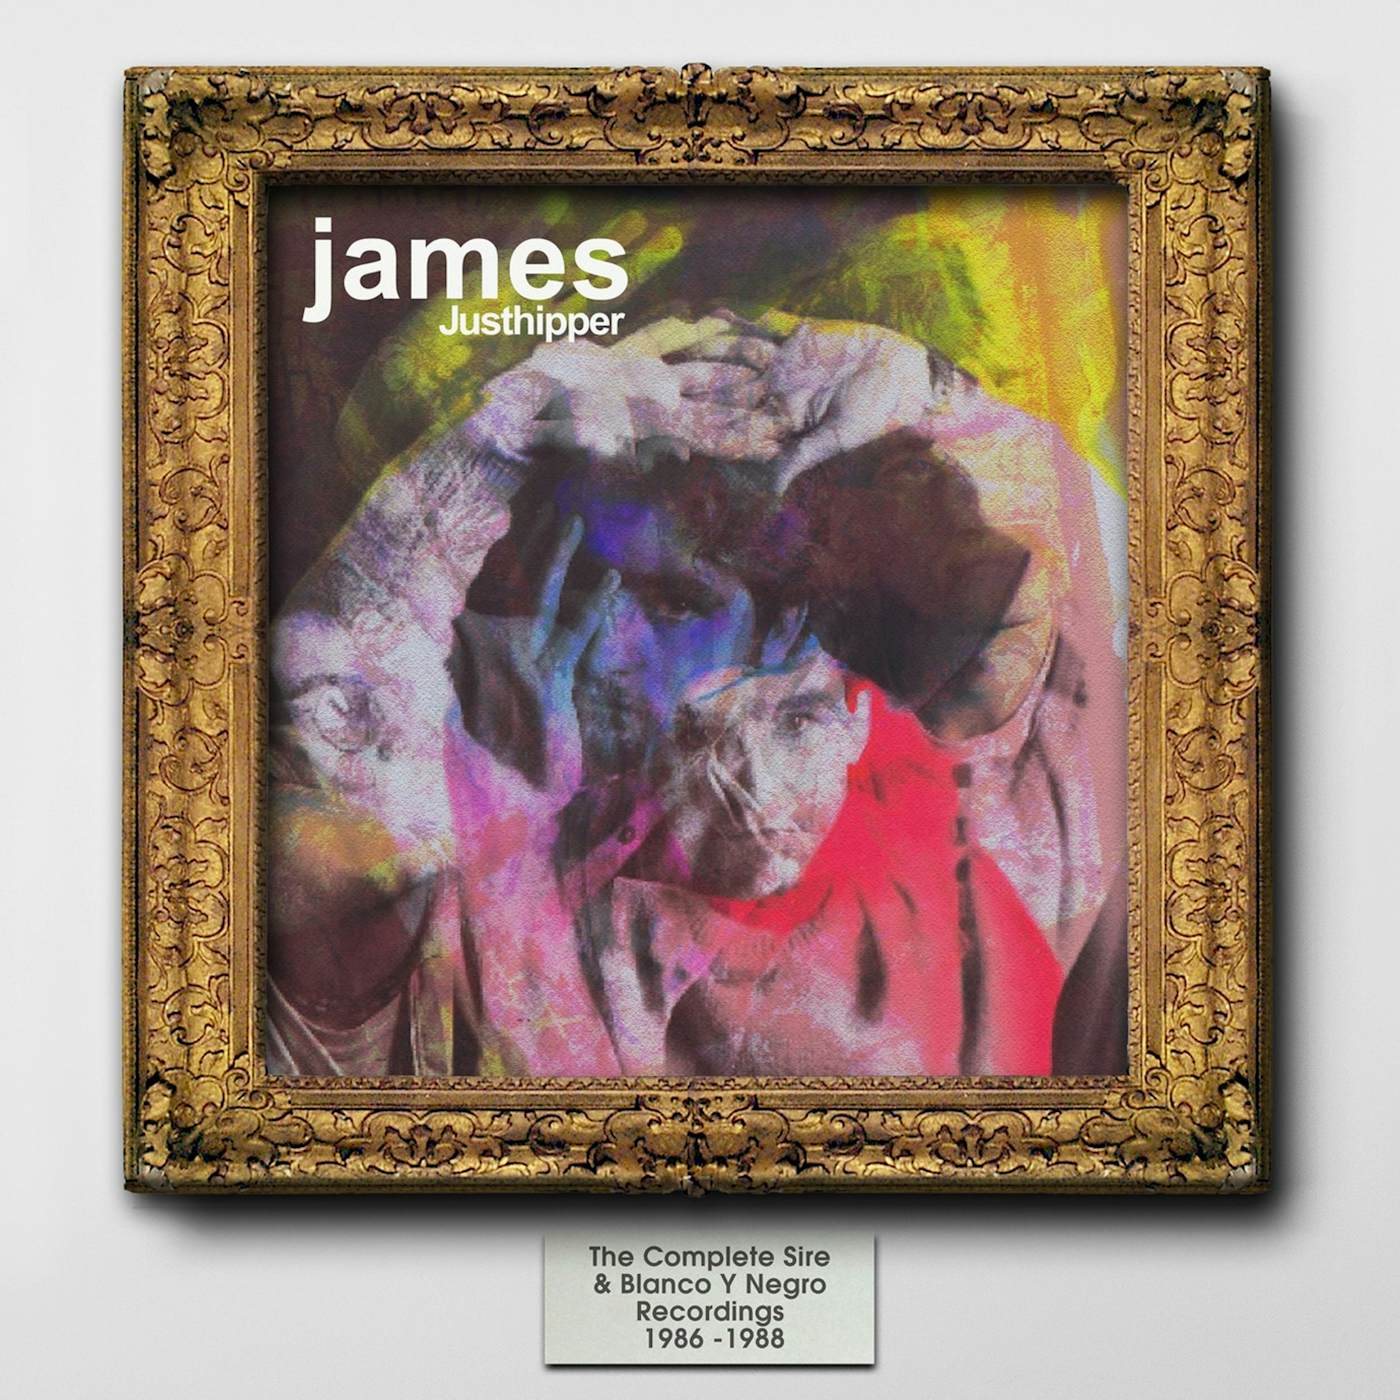 James JUSTHIPPER: COMPLETE SIRE & BLANCO Y NEGRO 1986-88 CD